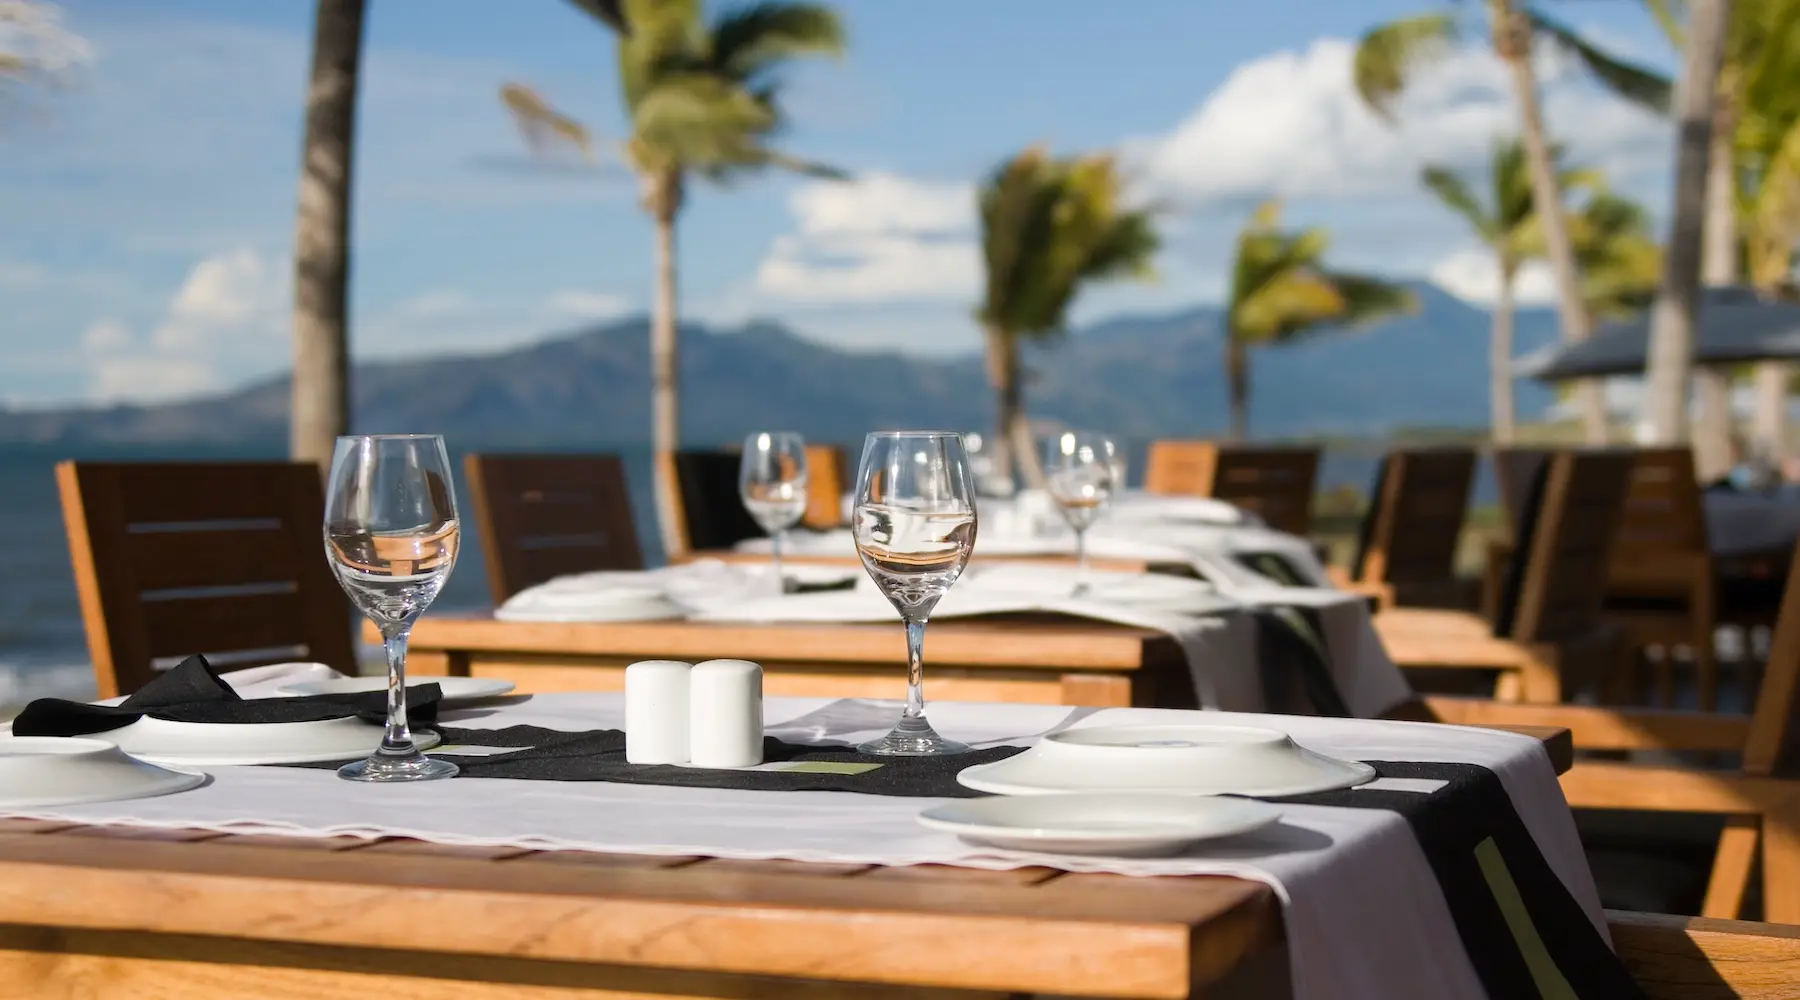 A tropical dinner setting at a restaurant in a Fiji Resort, with palm trees and mountains in the distance.